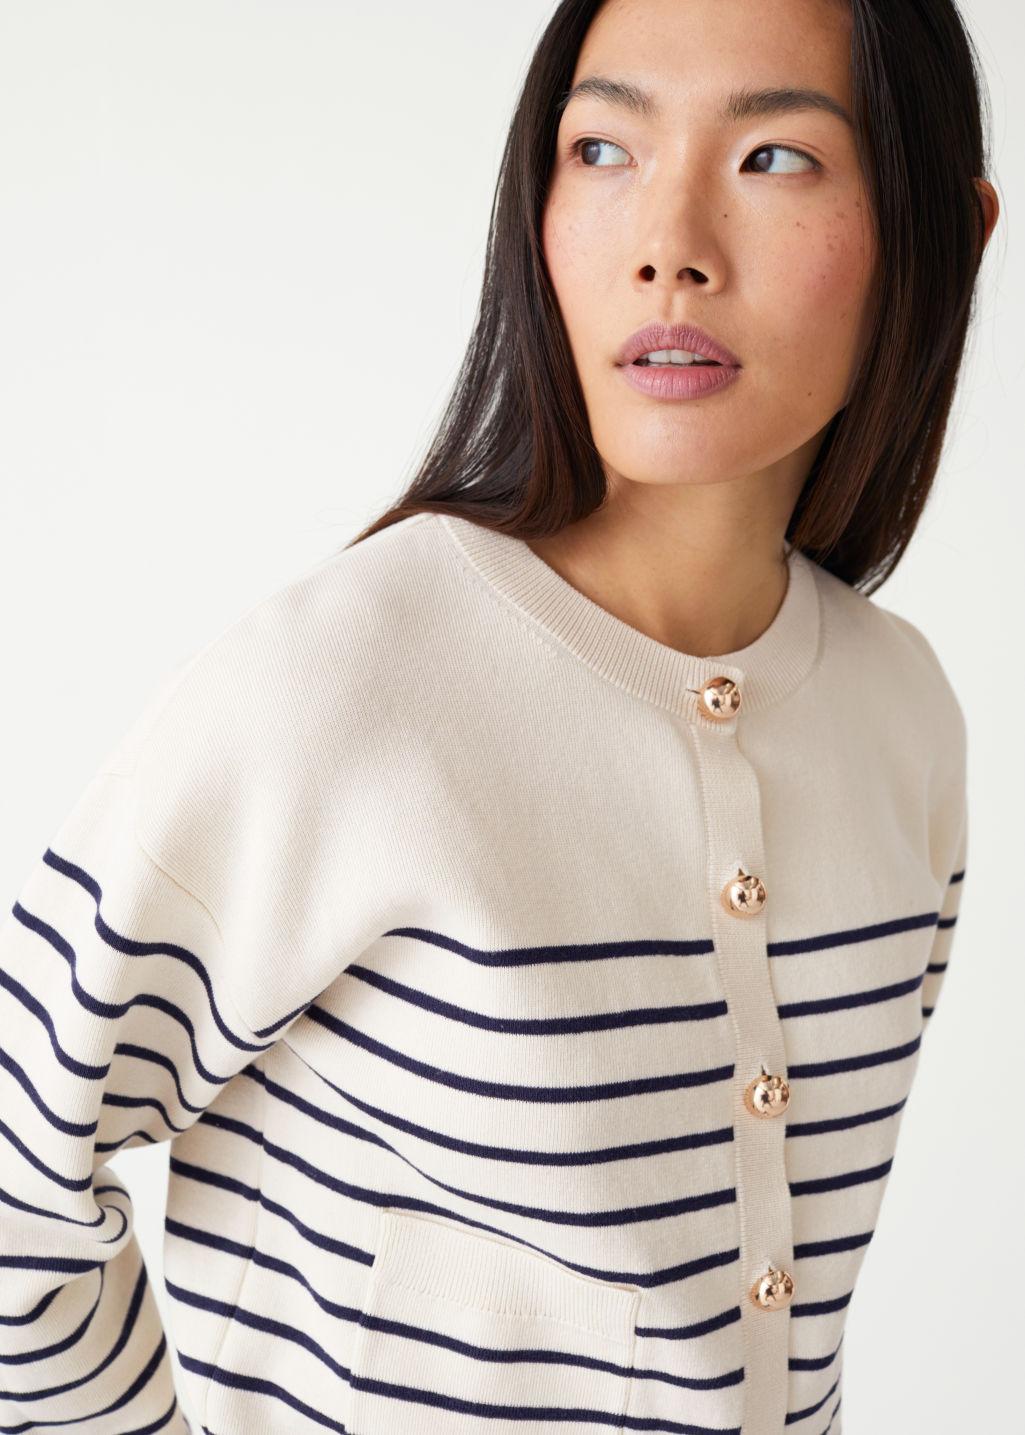 & Other Stories Cotton Striped Gold Button Cardigan in White | Lyst